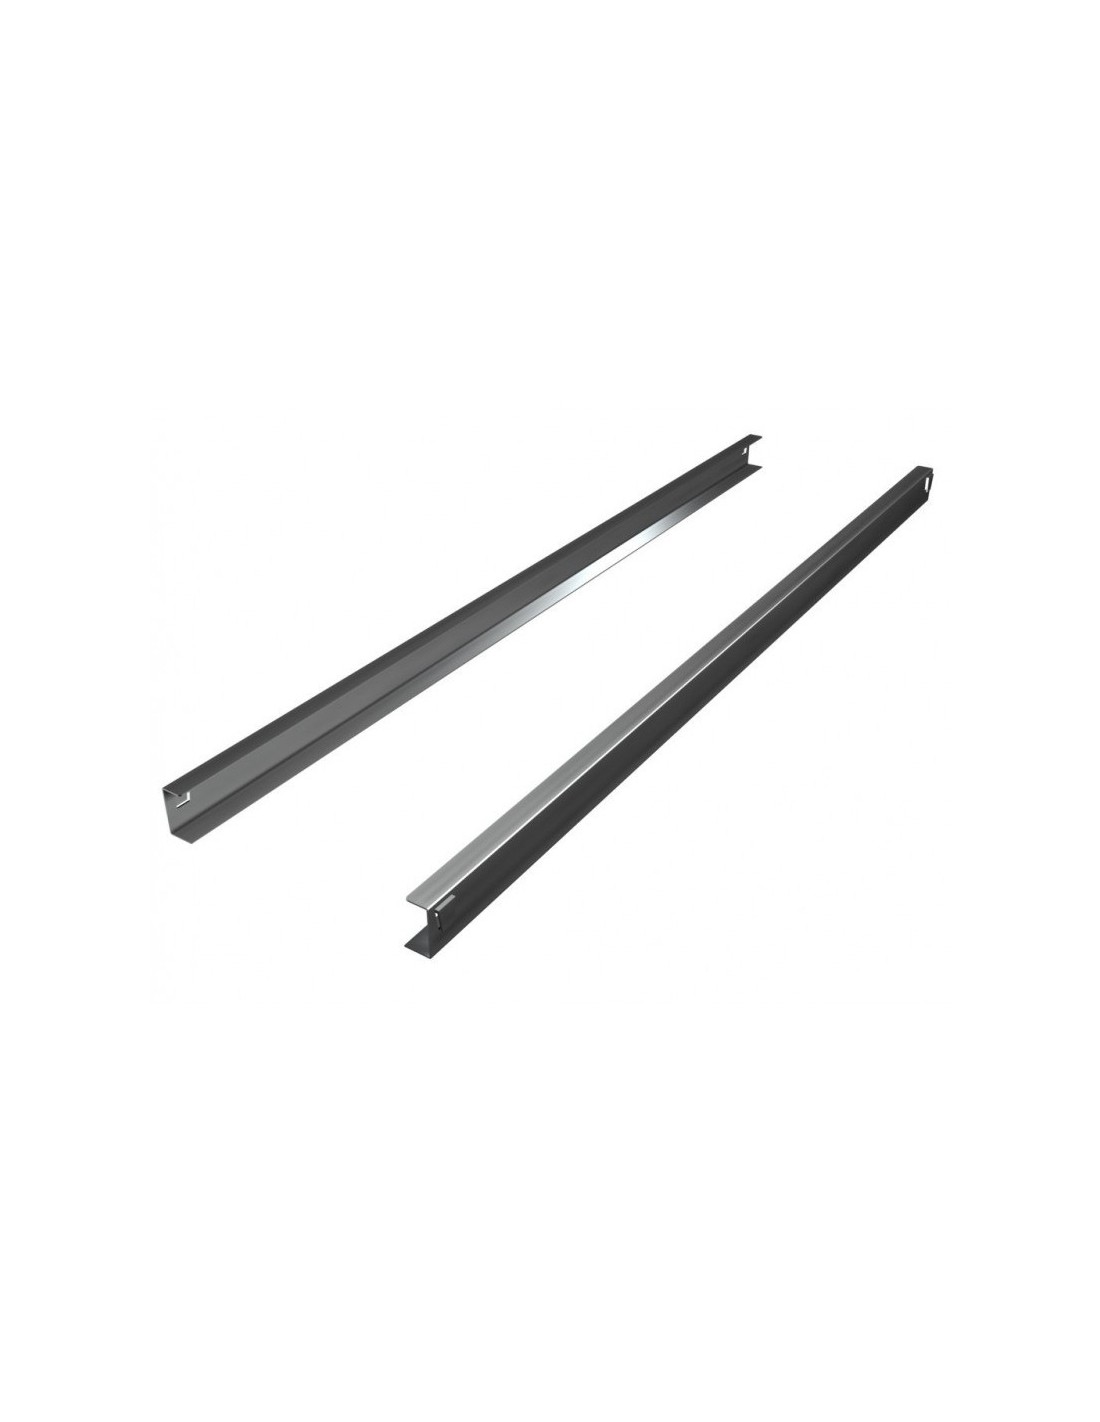 Pair of guides for grill - For model PA1500-2000TN-GR7